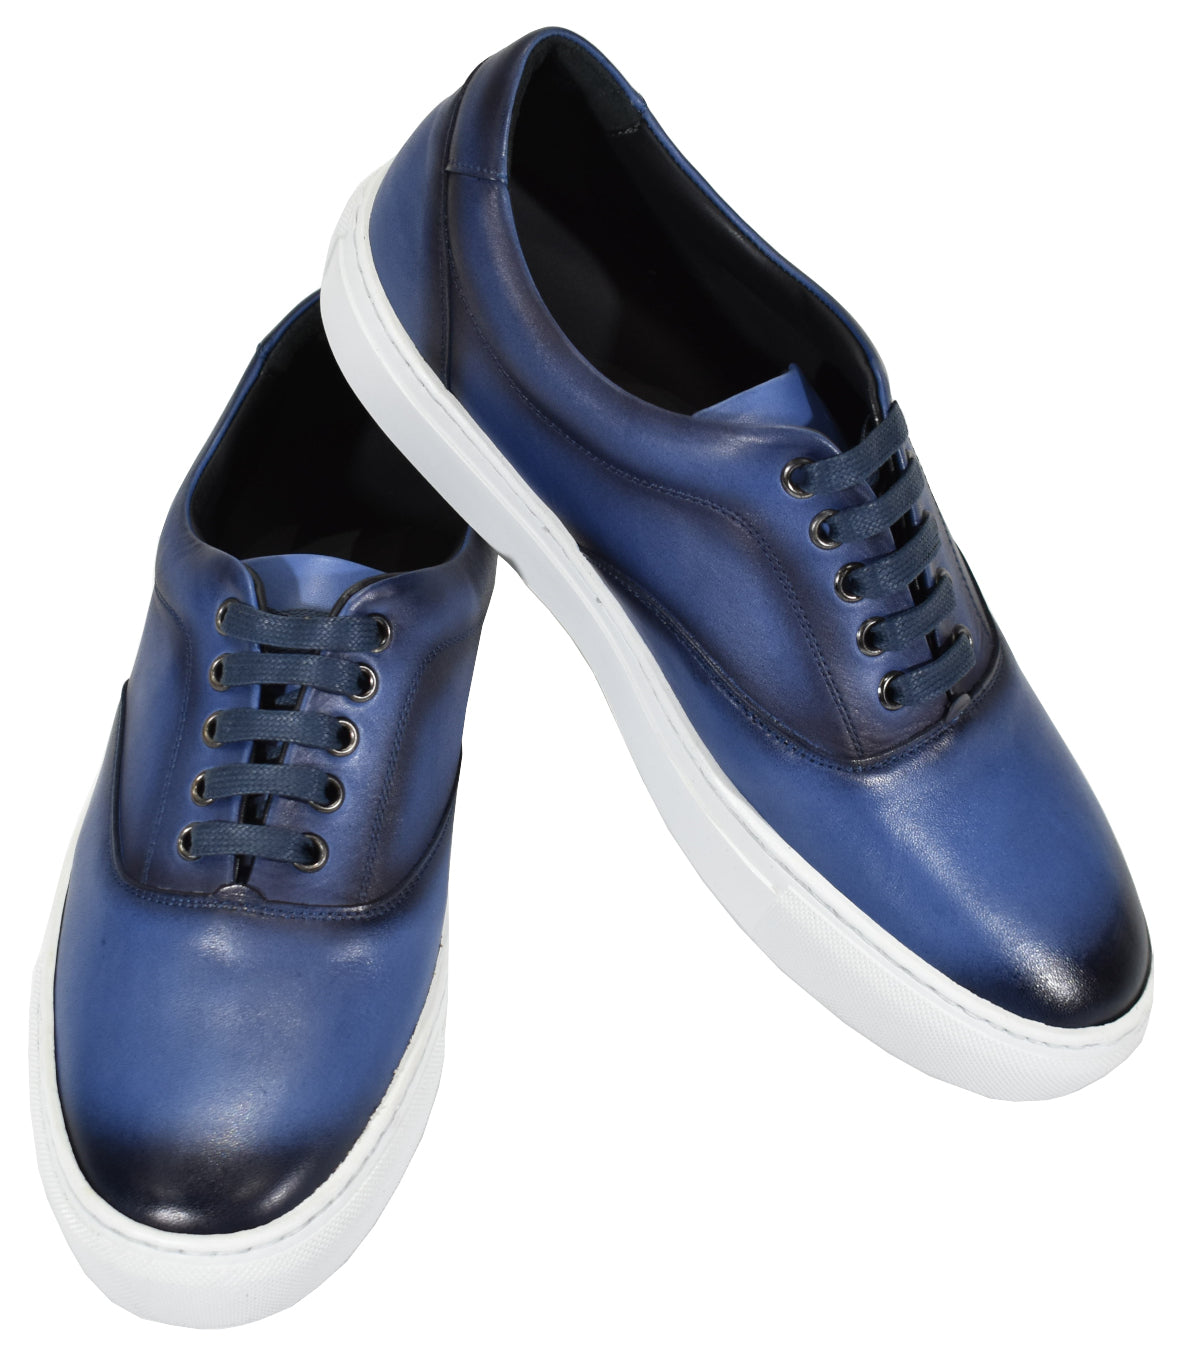 Classic men's sneaker, with a fashion leather upper, has never been more popular than now. Medium sole height, soft cushion insole for added comfort.  Simple clean design is both sleek and casual, perfect for everyday wear and sets a contemporary image.  Designed and manufactured in Spain.  Classic fit. Indigo leather sneaker by Marcello.